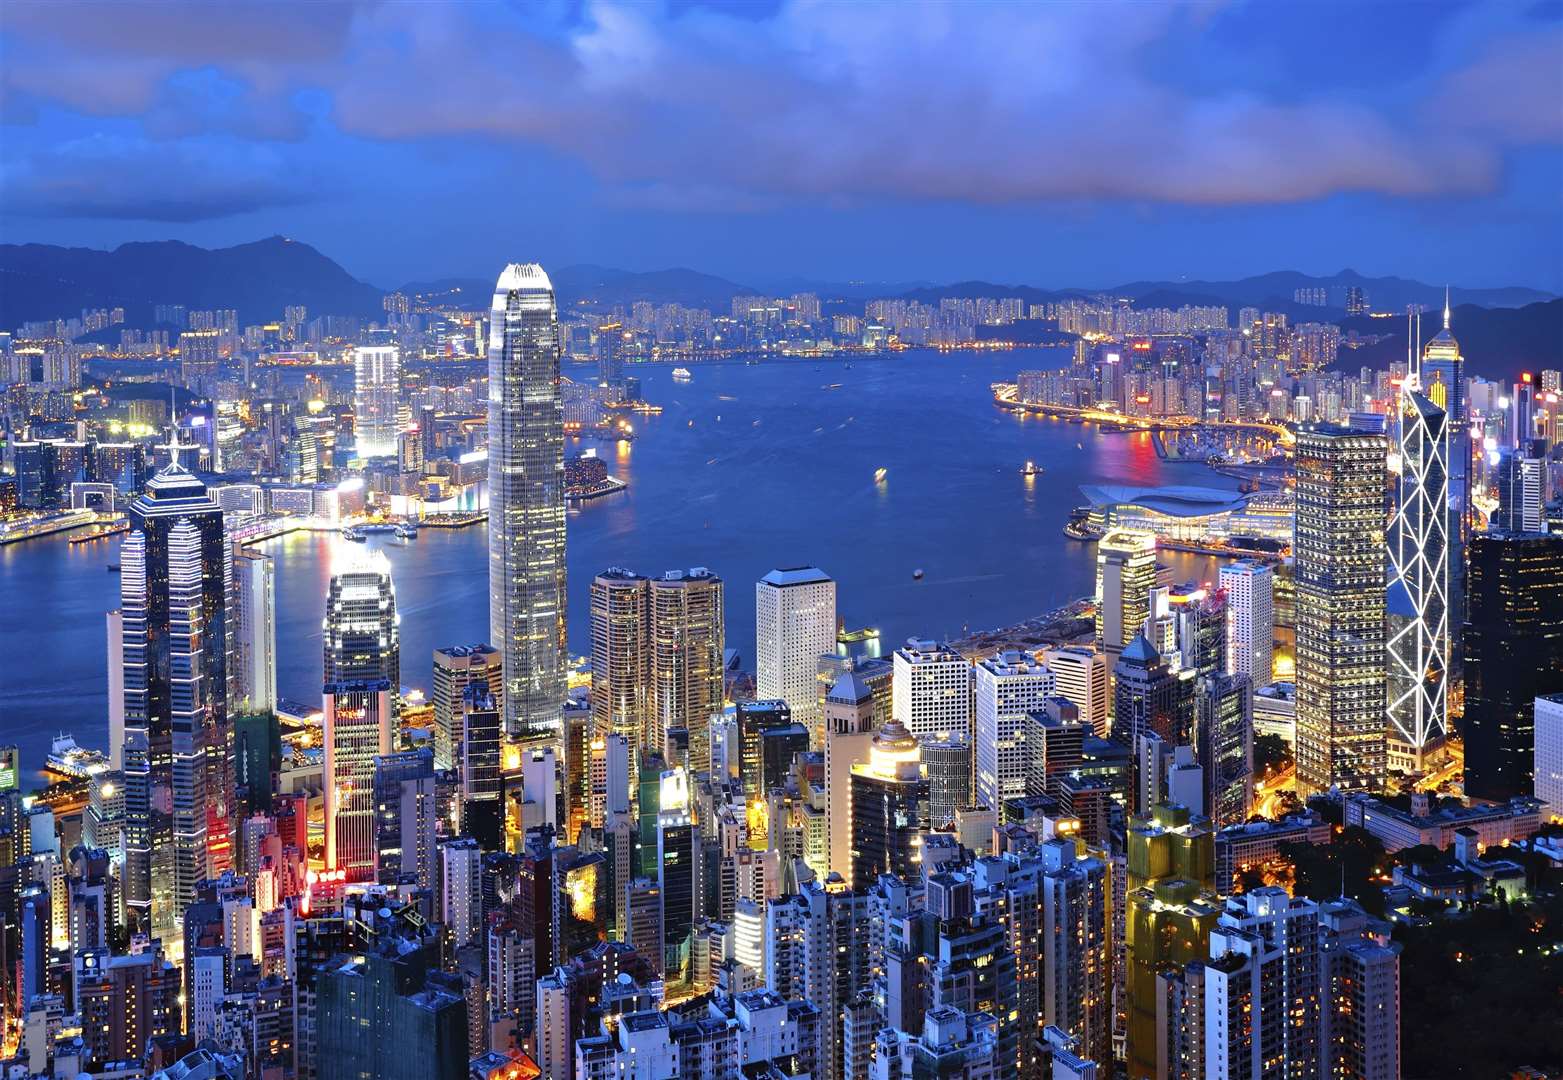 It is thought up to one million people will take advantage of the visa scheme to leave Hong Kong and move to the UK